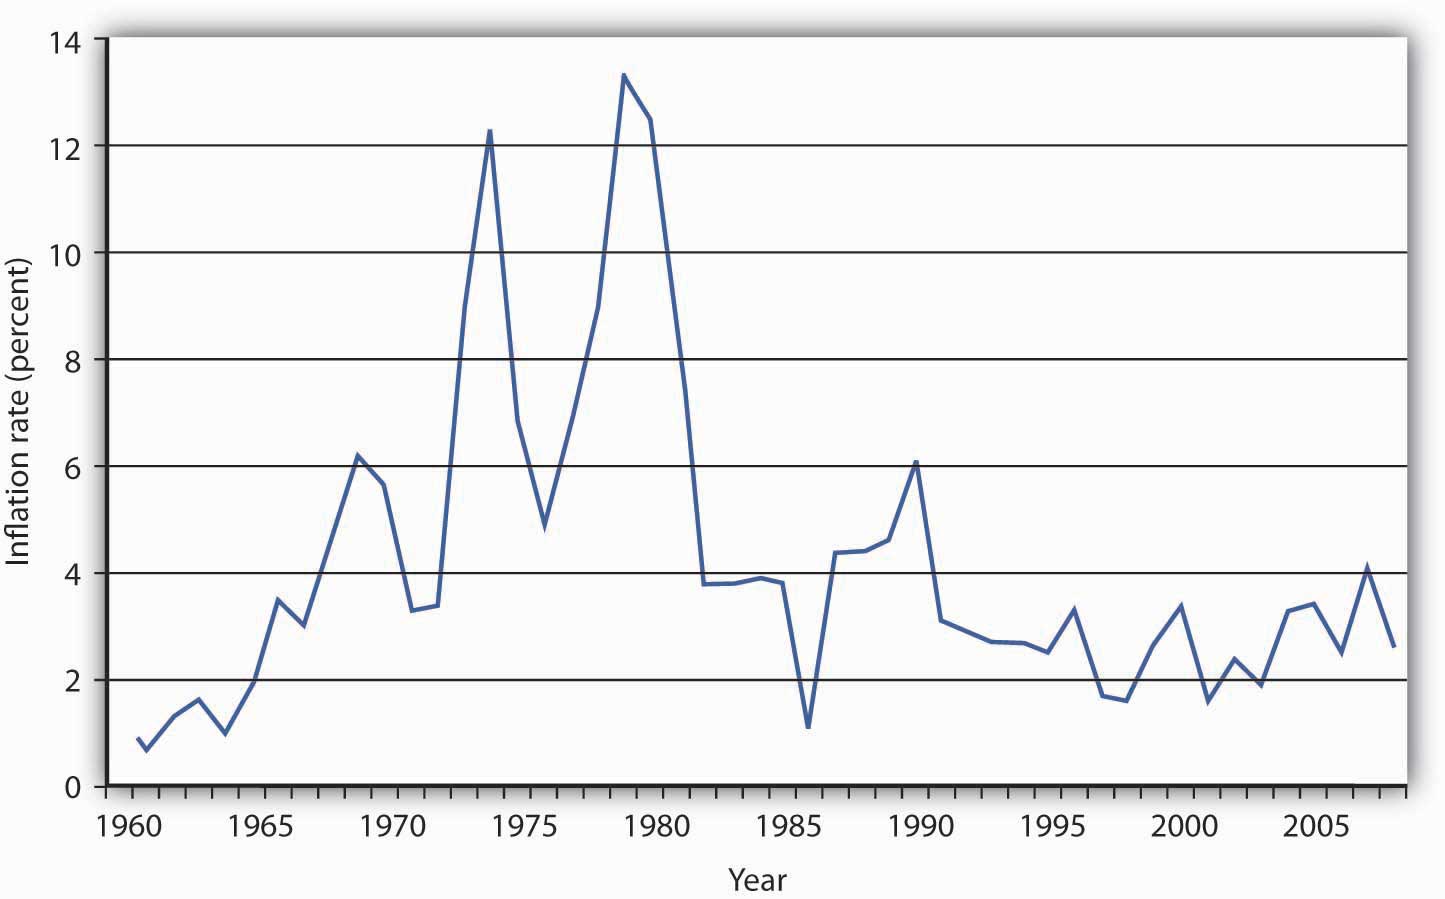 Line graph showing the rate of inflation in the U.S. between 1960 and 2008. The inflation rate was especially high in 1973, then dipped back down until rising to it's highest level in the late 1970s. Since the 1990s, it's been relatively stable between 2 and 4%.